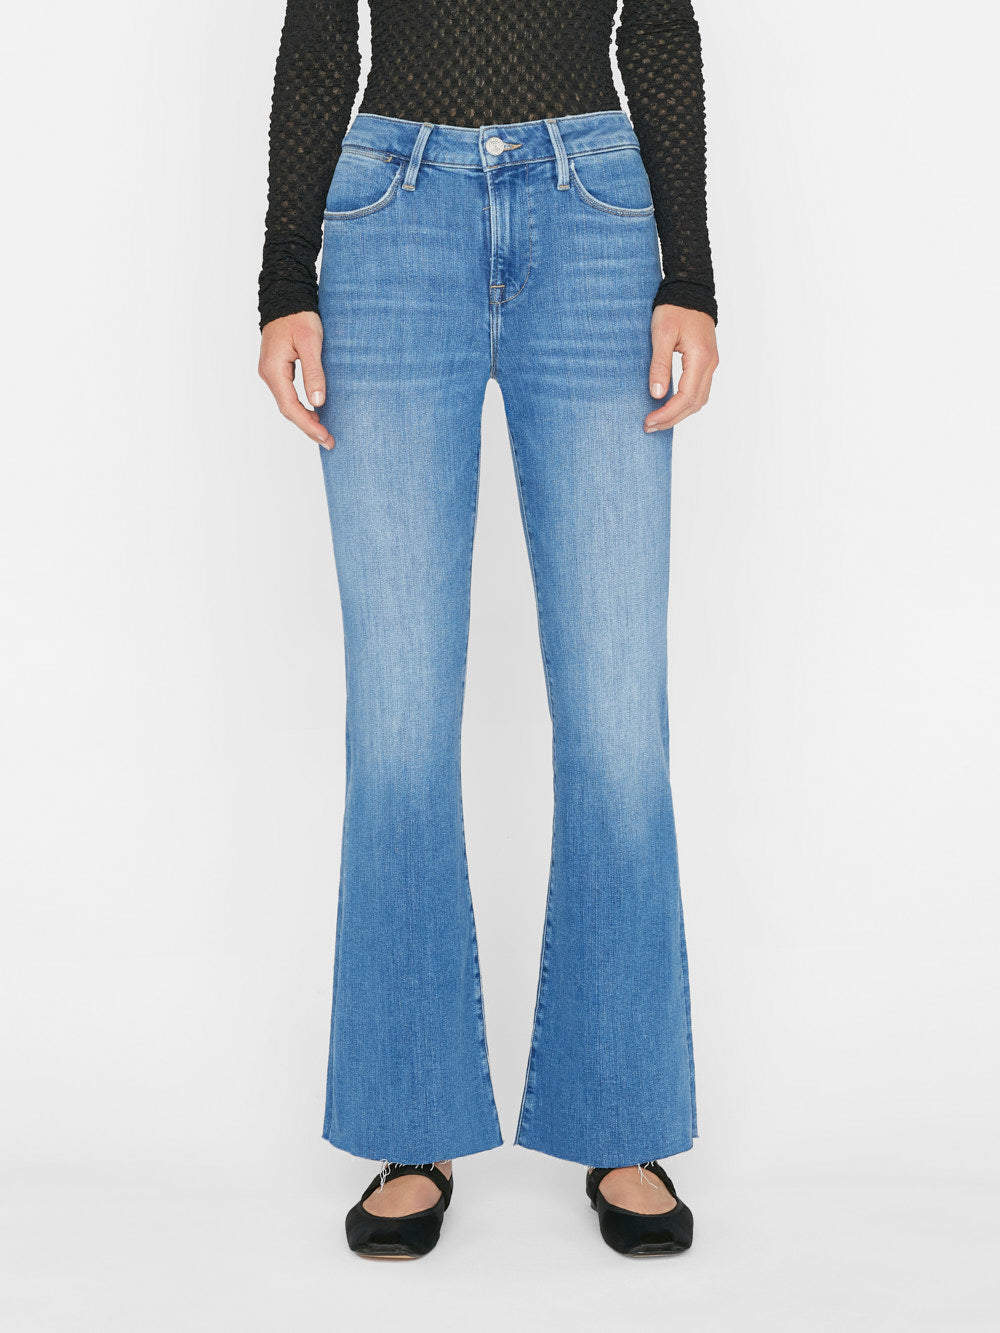 White 'Le Easy Flare' Jeans by FRAME on Sale